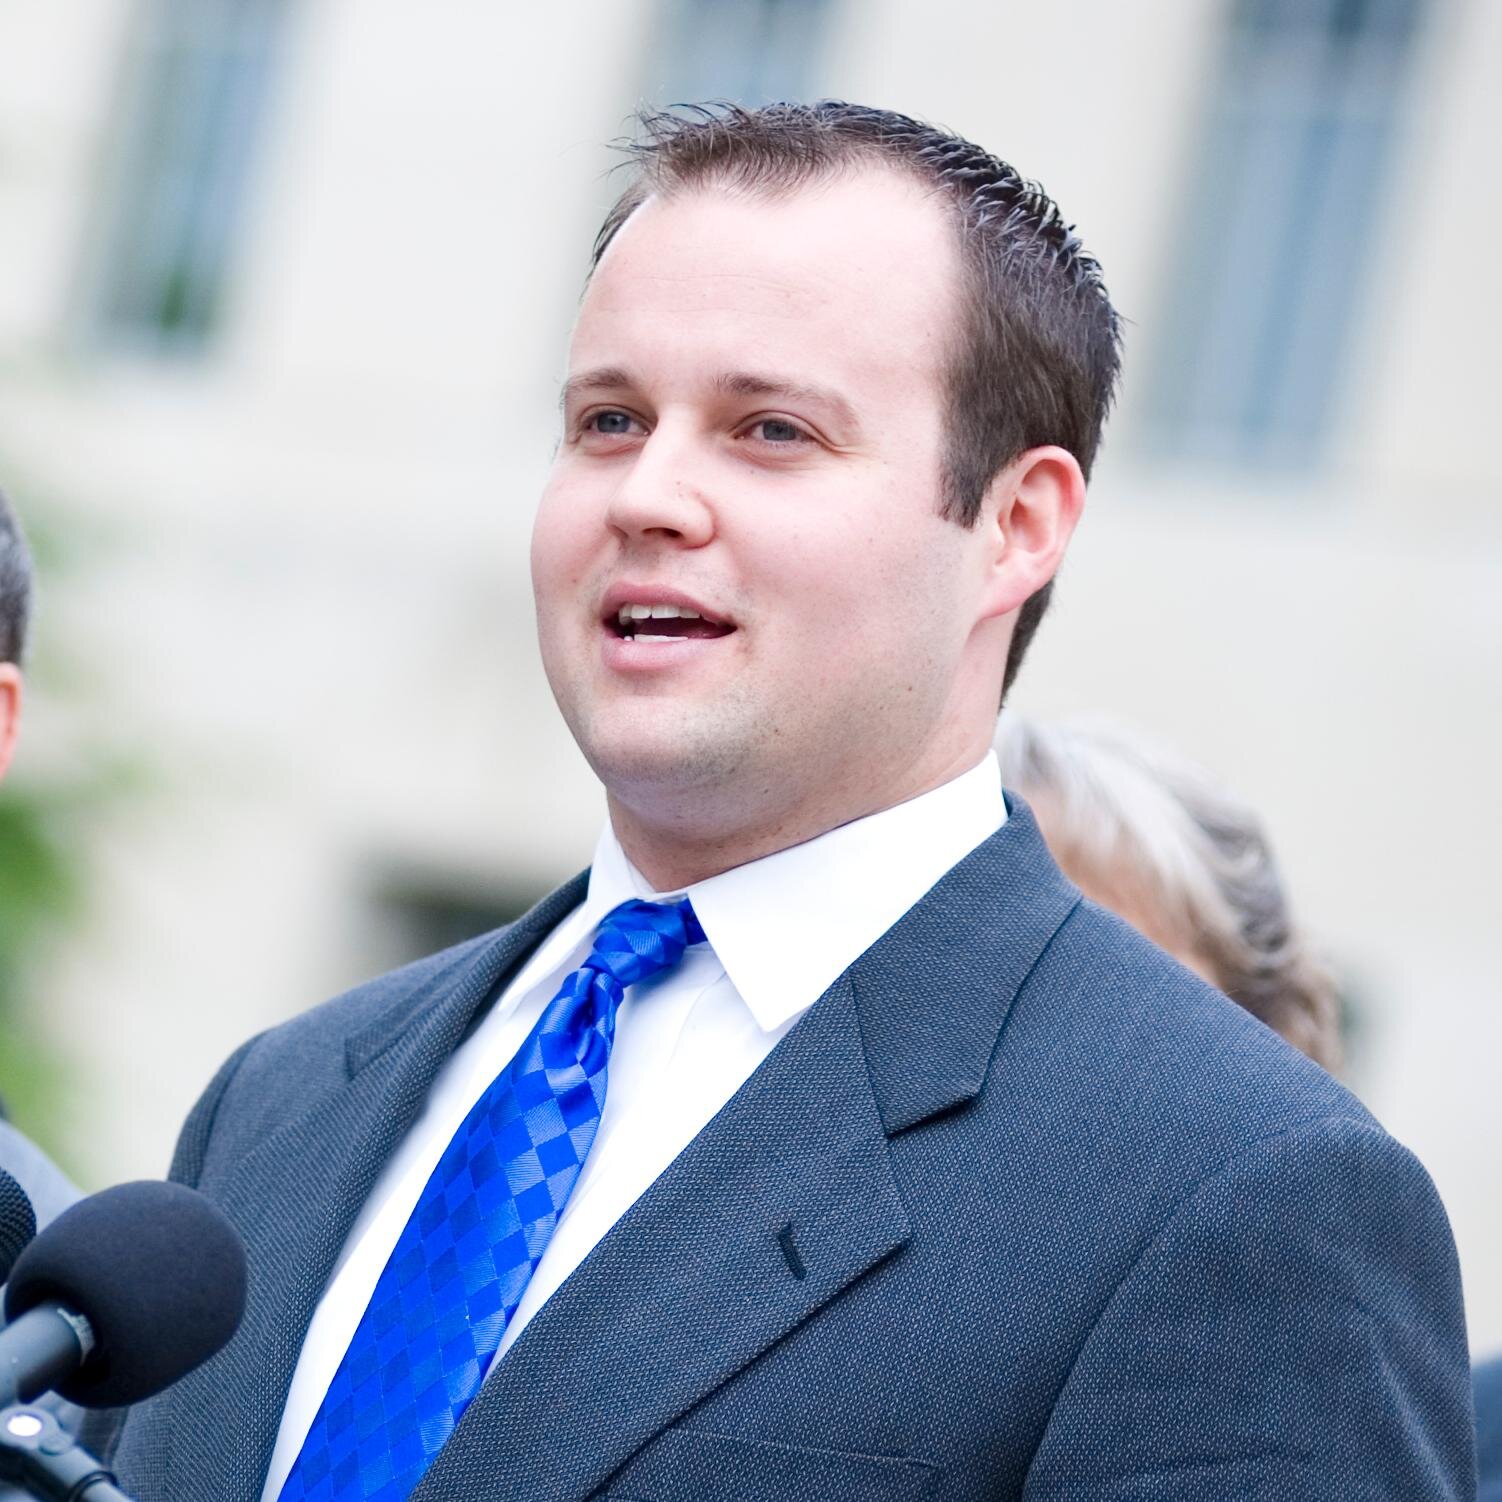 Josh Duggar’s Lawyers Attempt To Have Controversial Photos Removed